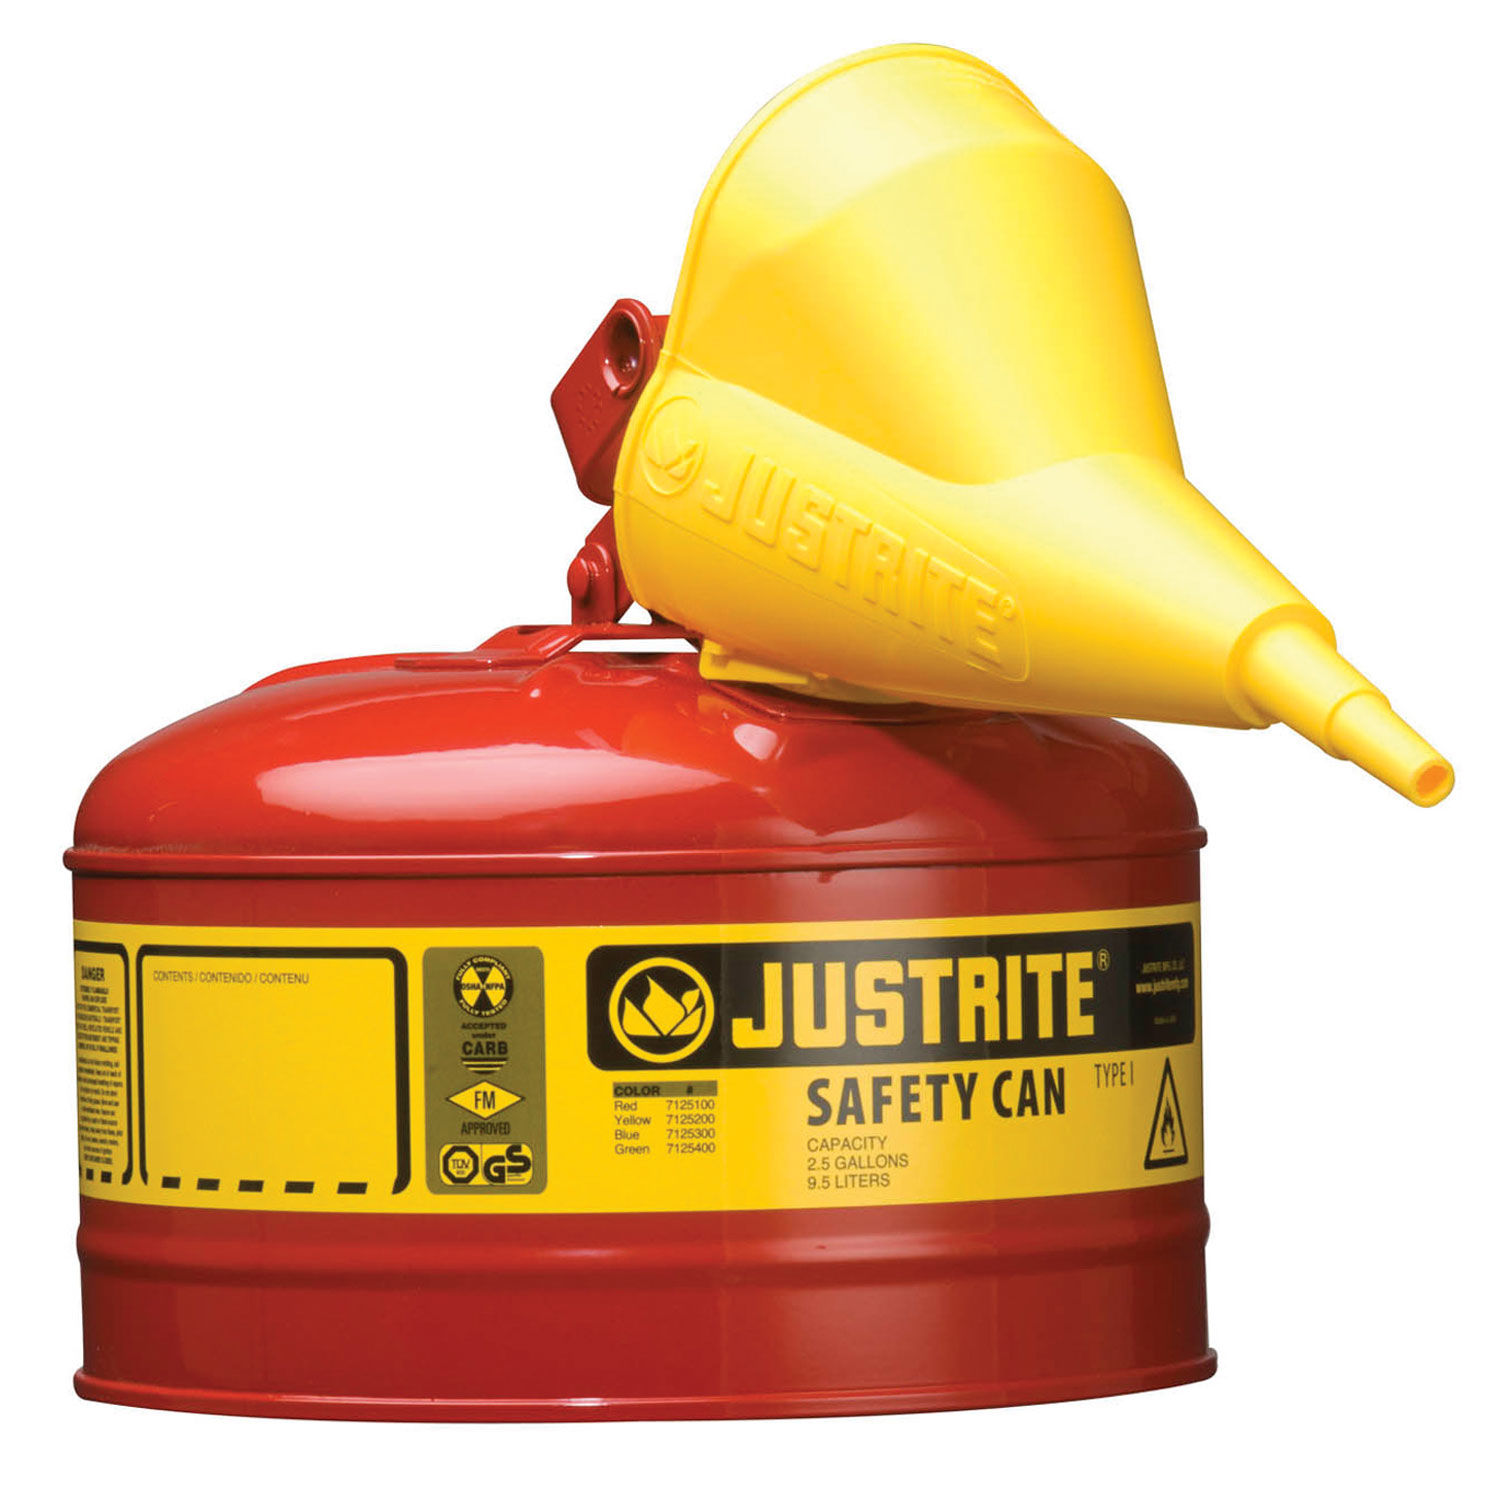 Galvanized Steel Type I Yellow Safety Can Justrite 7120200 2 Gallon